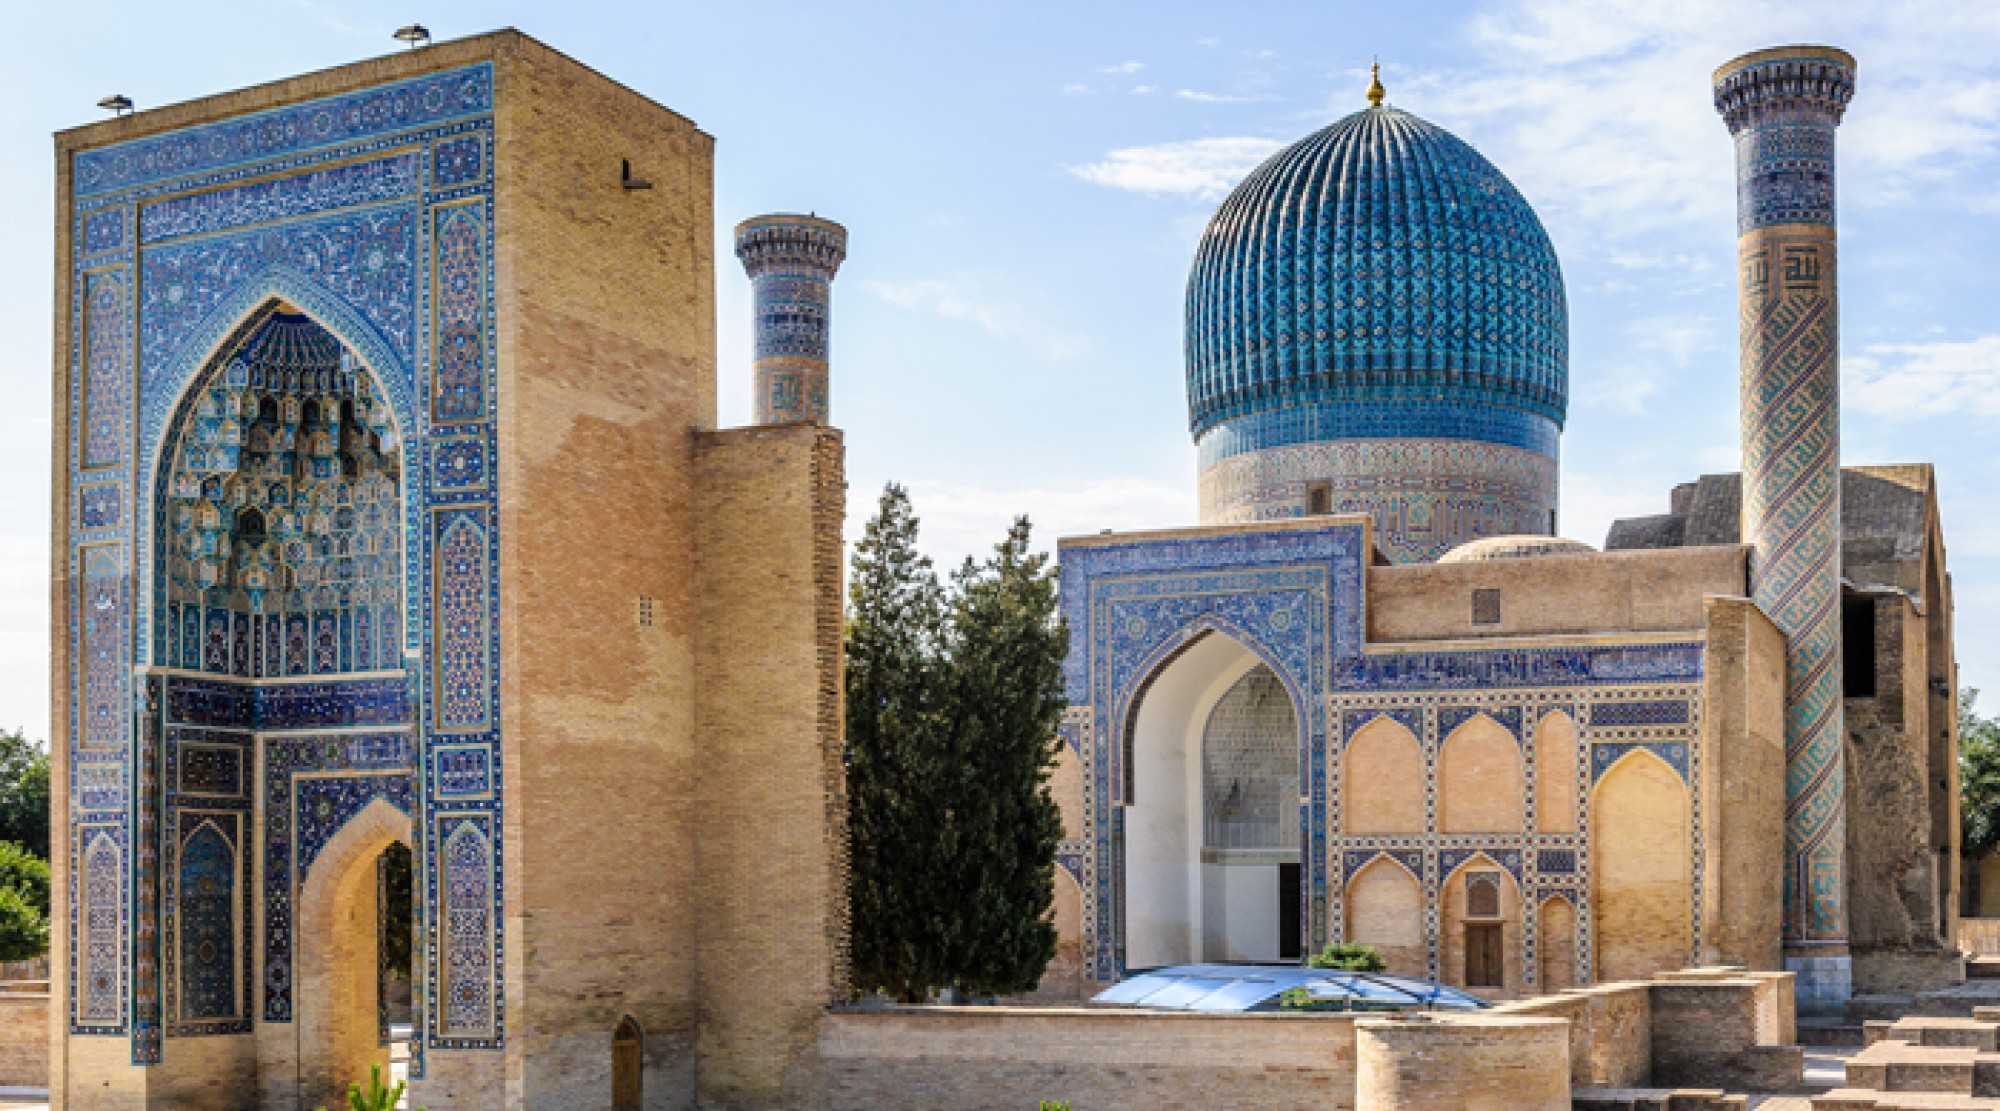 The road to Samarkand | The Splendid Table